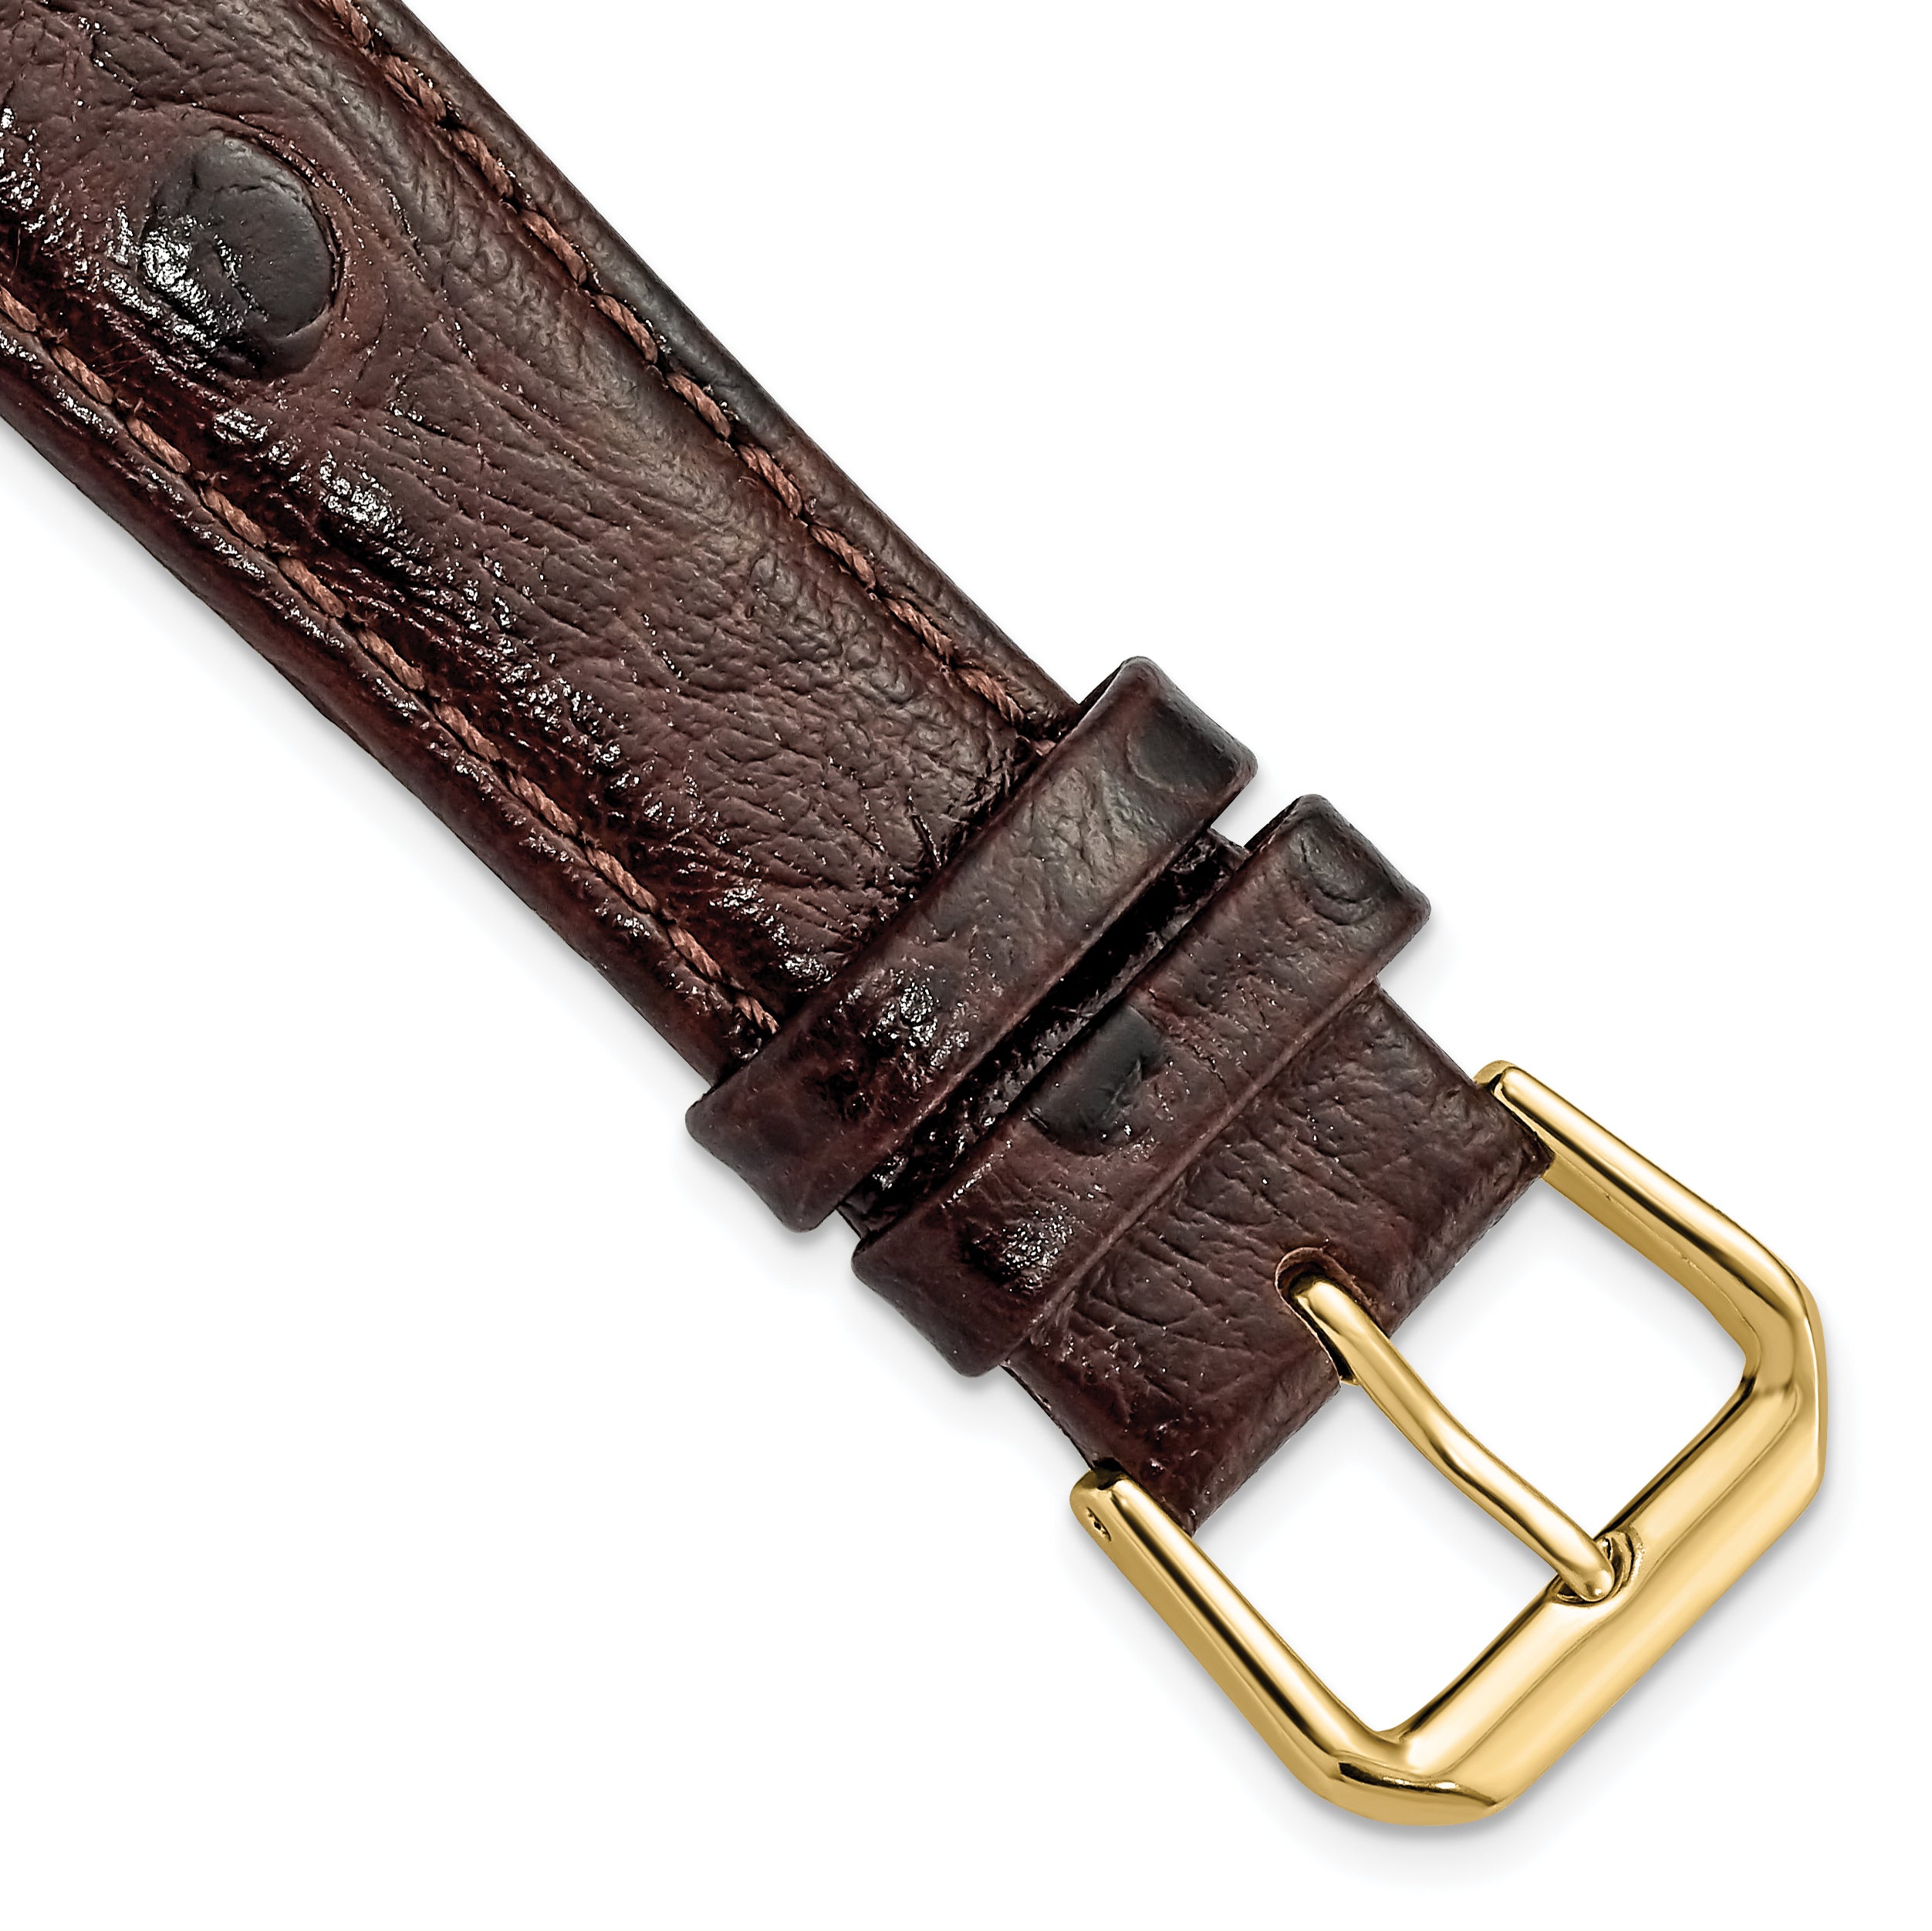 DeBeer 19mm Brown Ostrich Grain Leather with Gold-tone Buckle 7.5 inch Watch Band